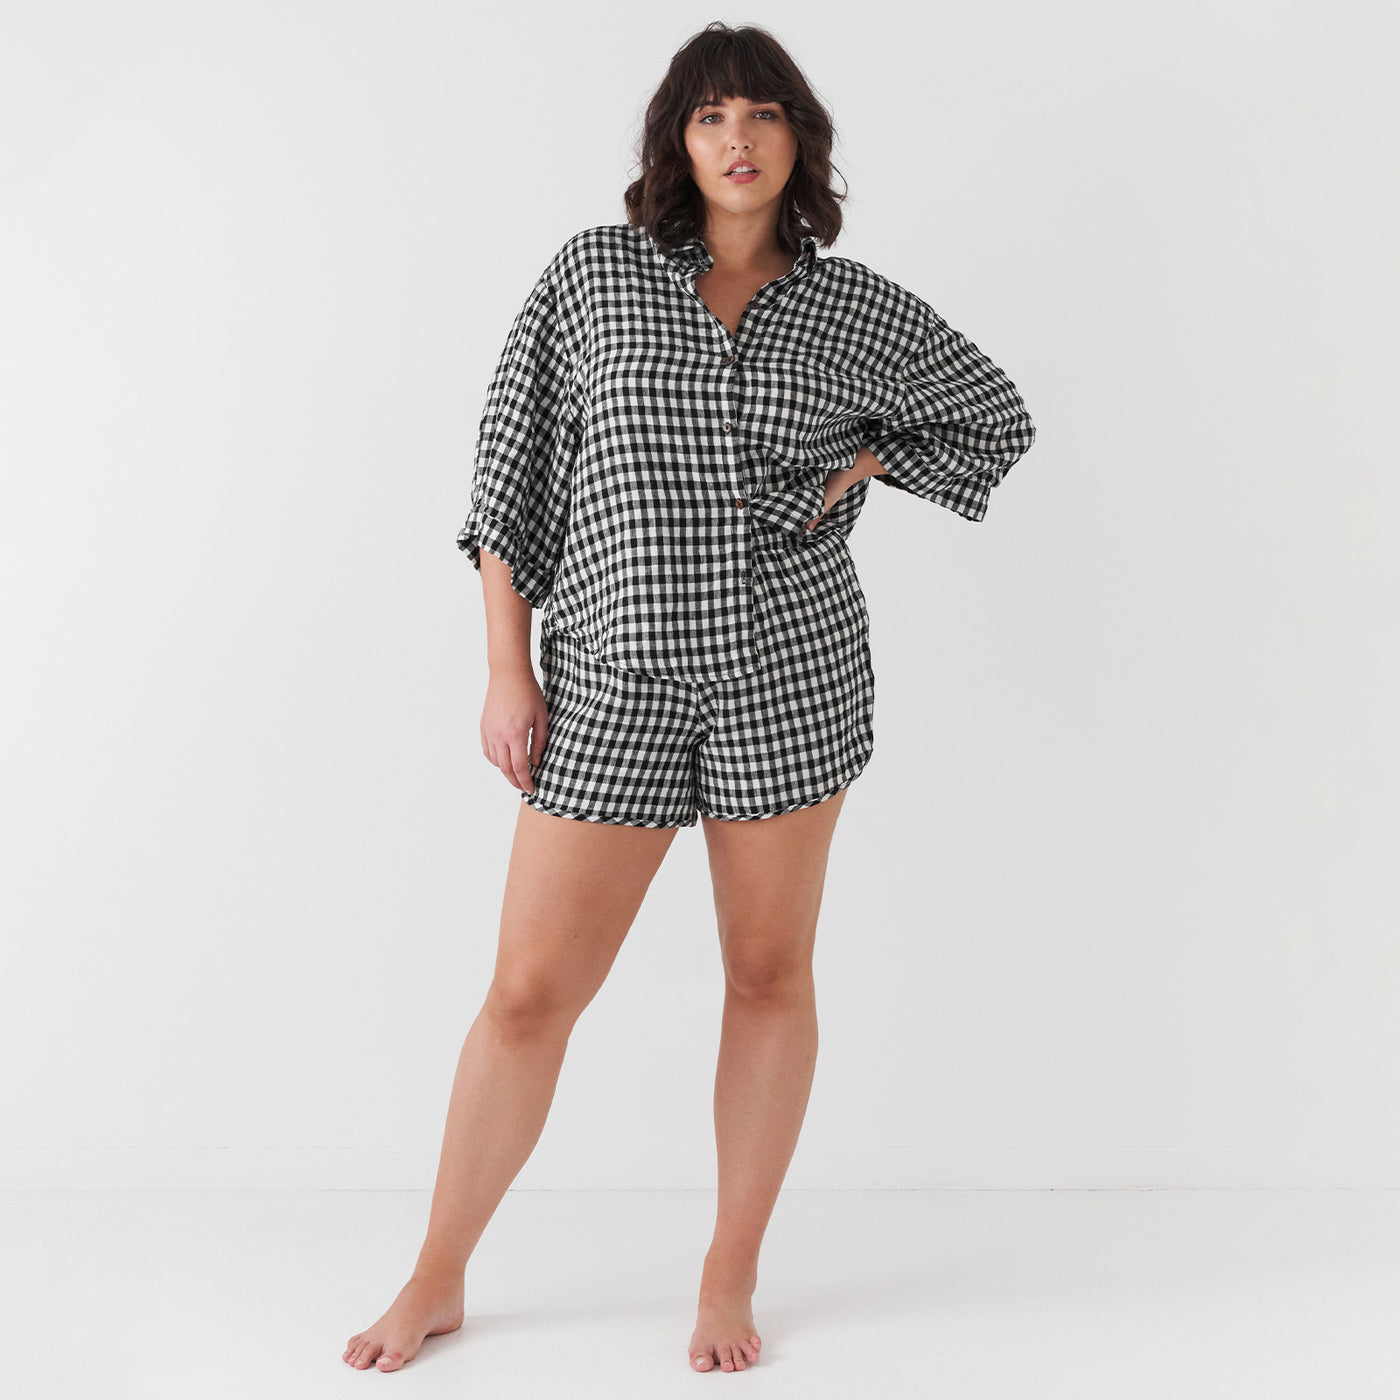 French Flax Linen Relax Short in Charcoal Gingham